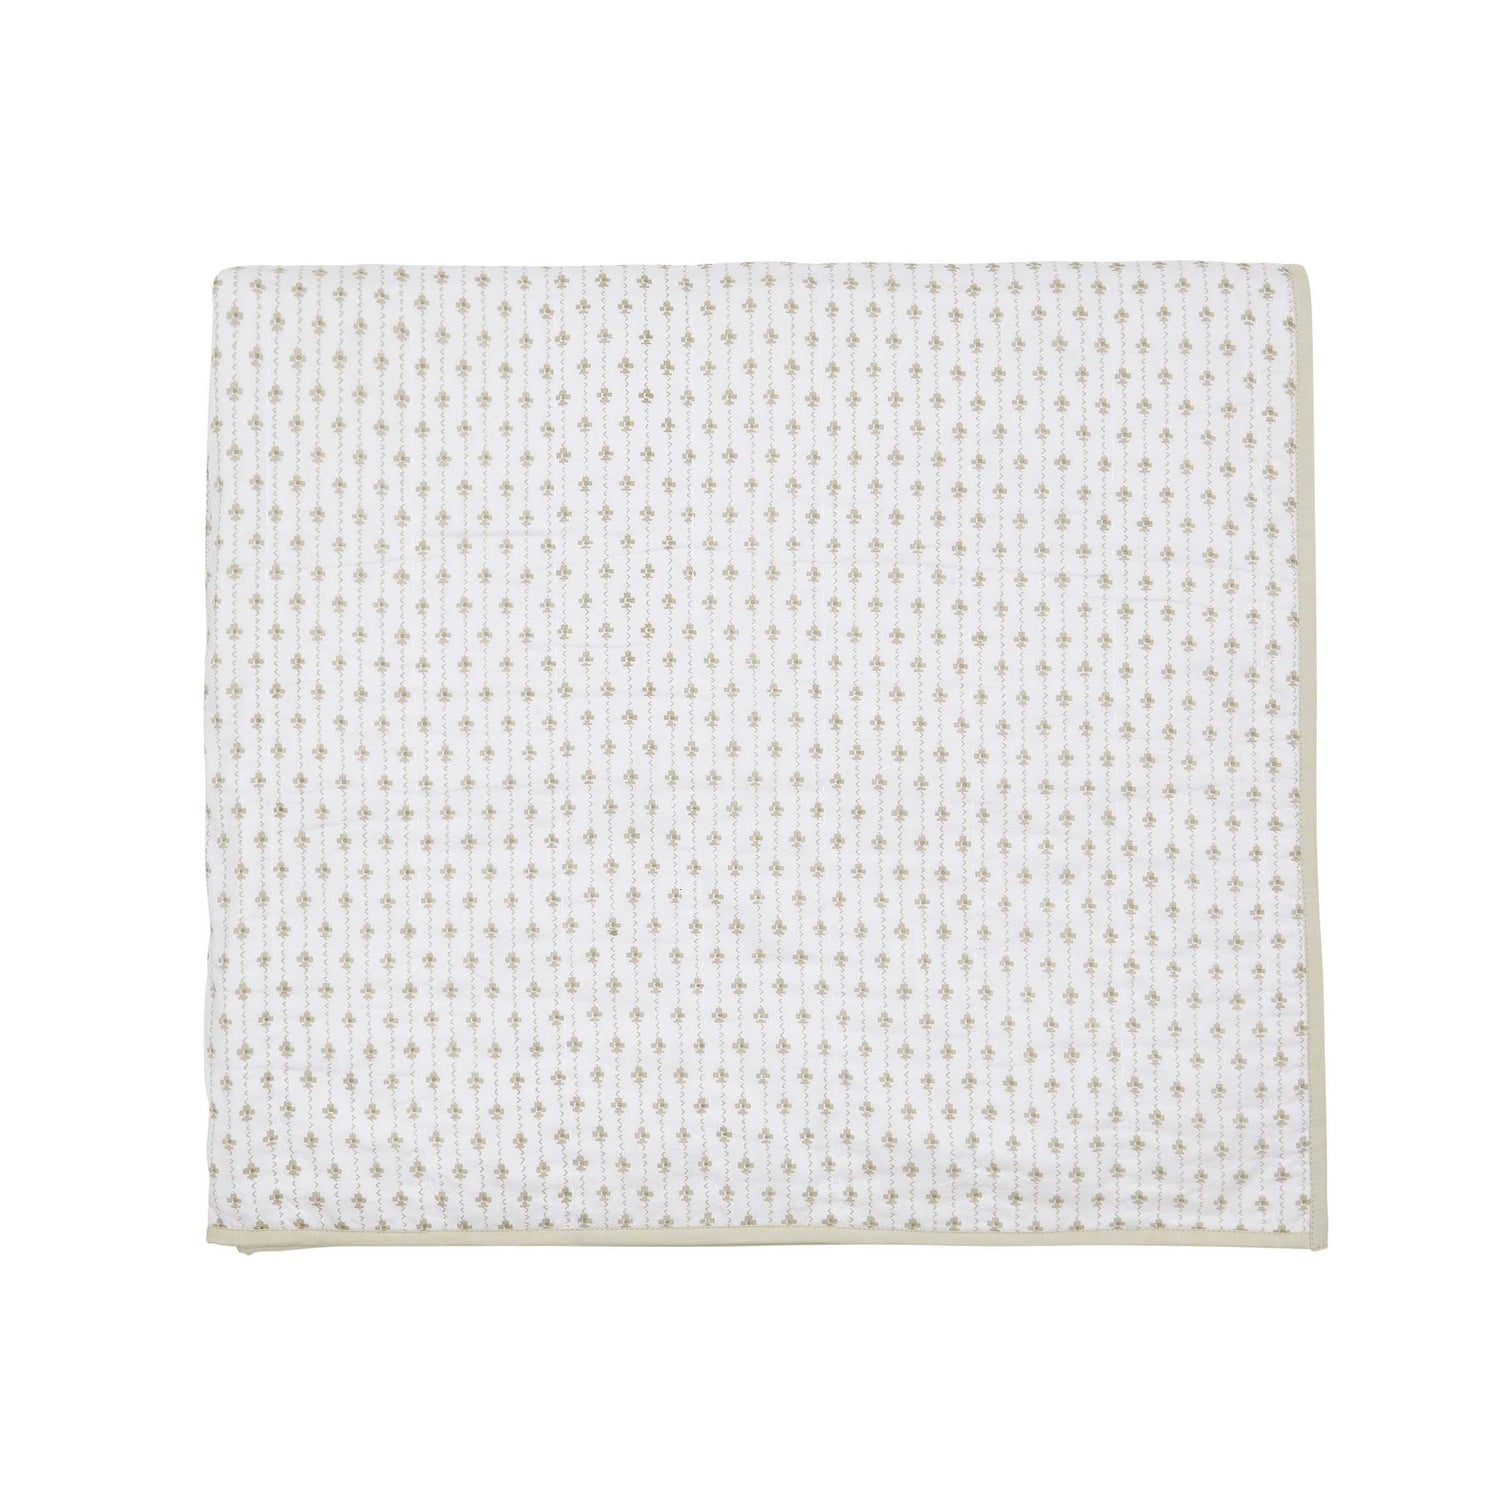 White and Green Patterned Murmur Throw